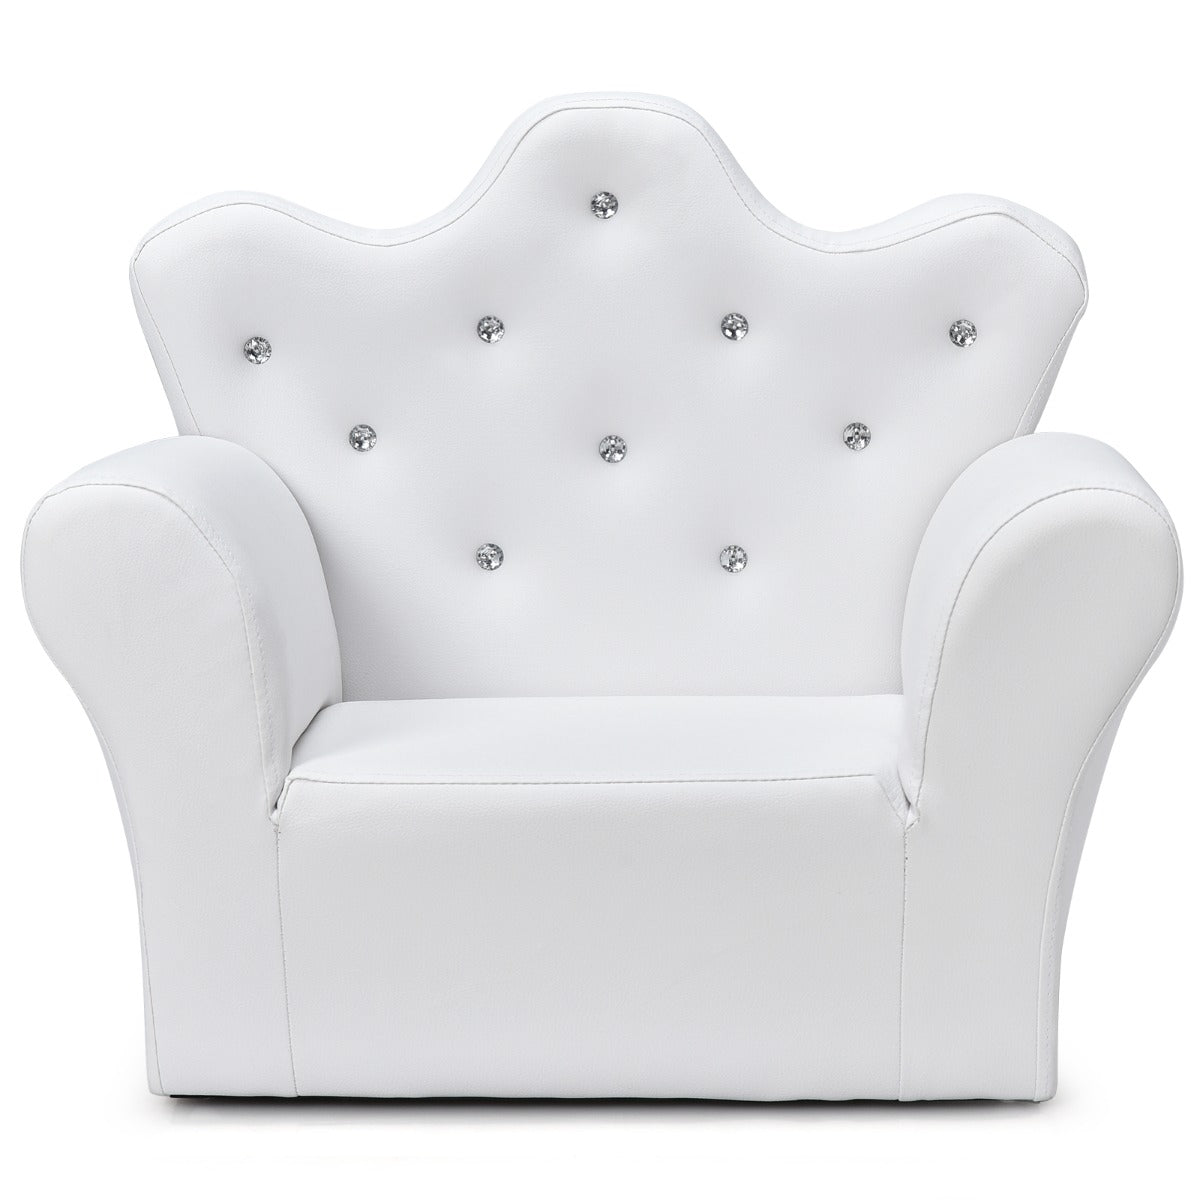 Crown-Shaped Backrest Kids Sofa: Majestic Seating with Ottoman for Toddlers